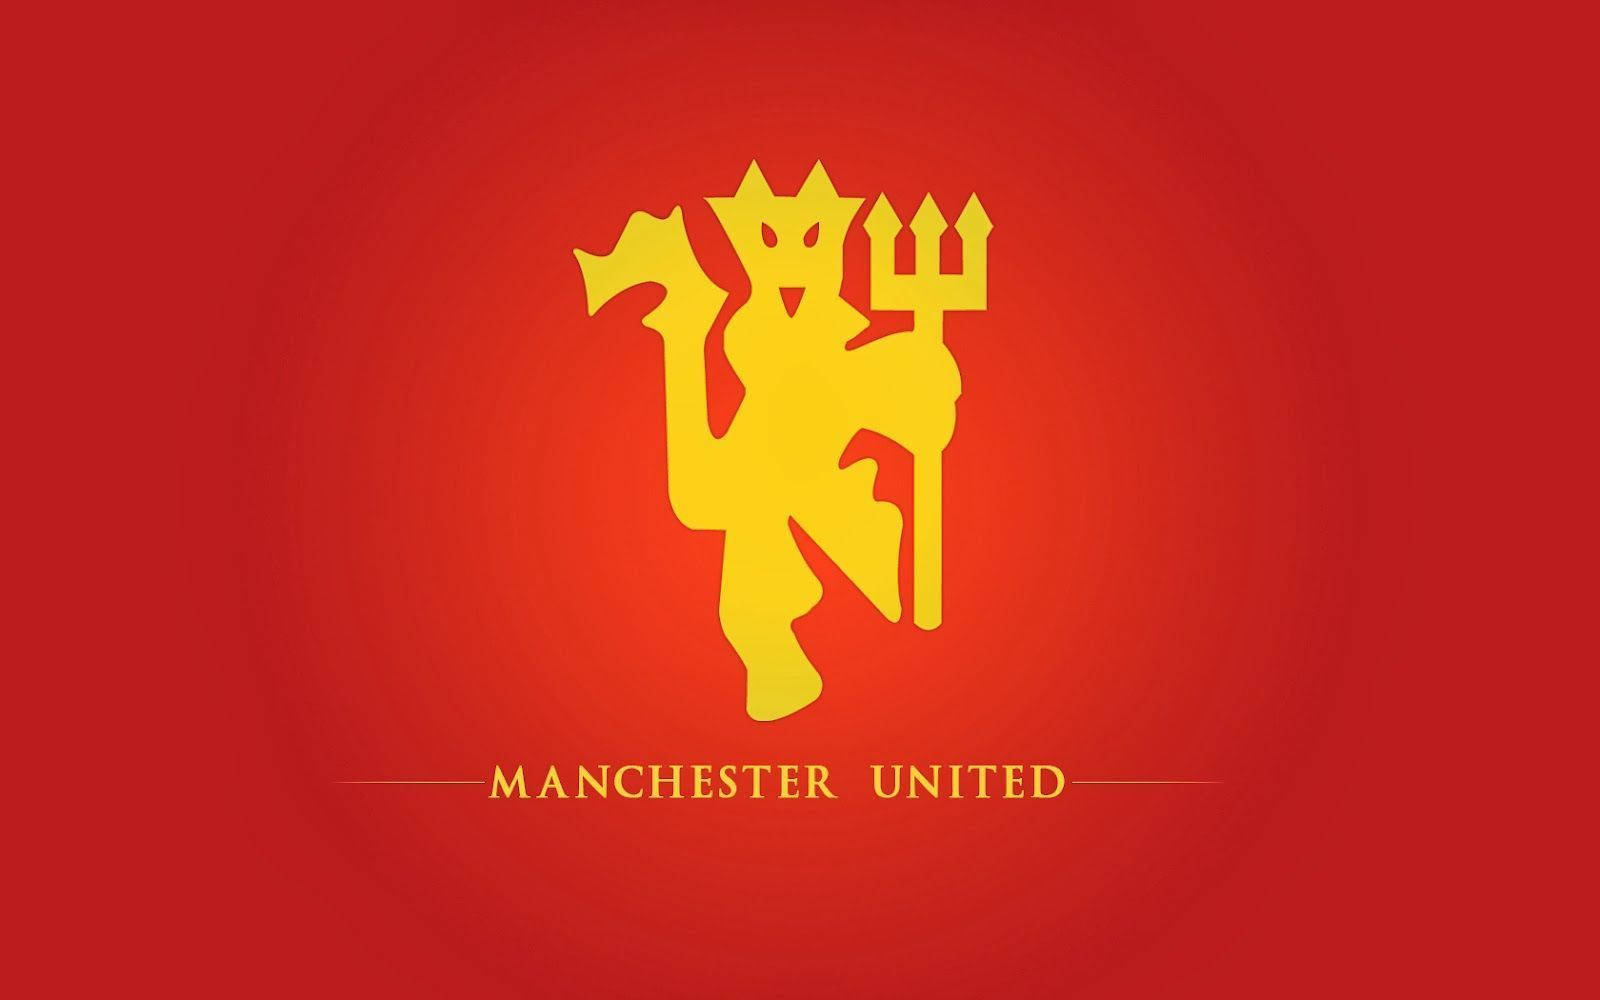 Vibrant And Iconic Manchester United Logo On A Dark Background